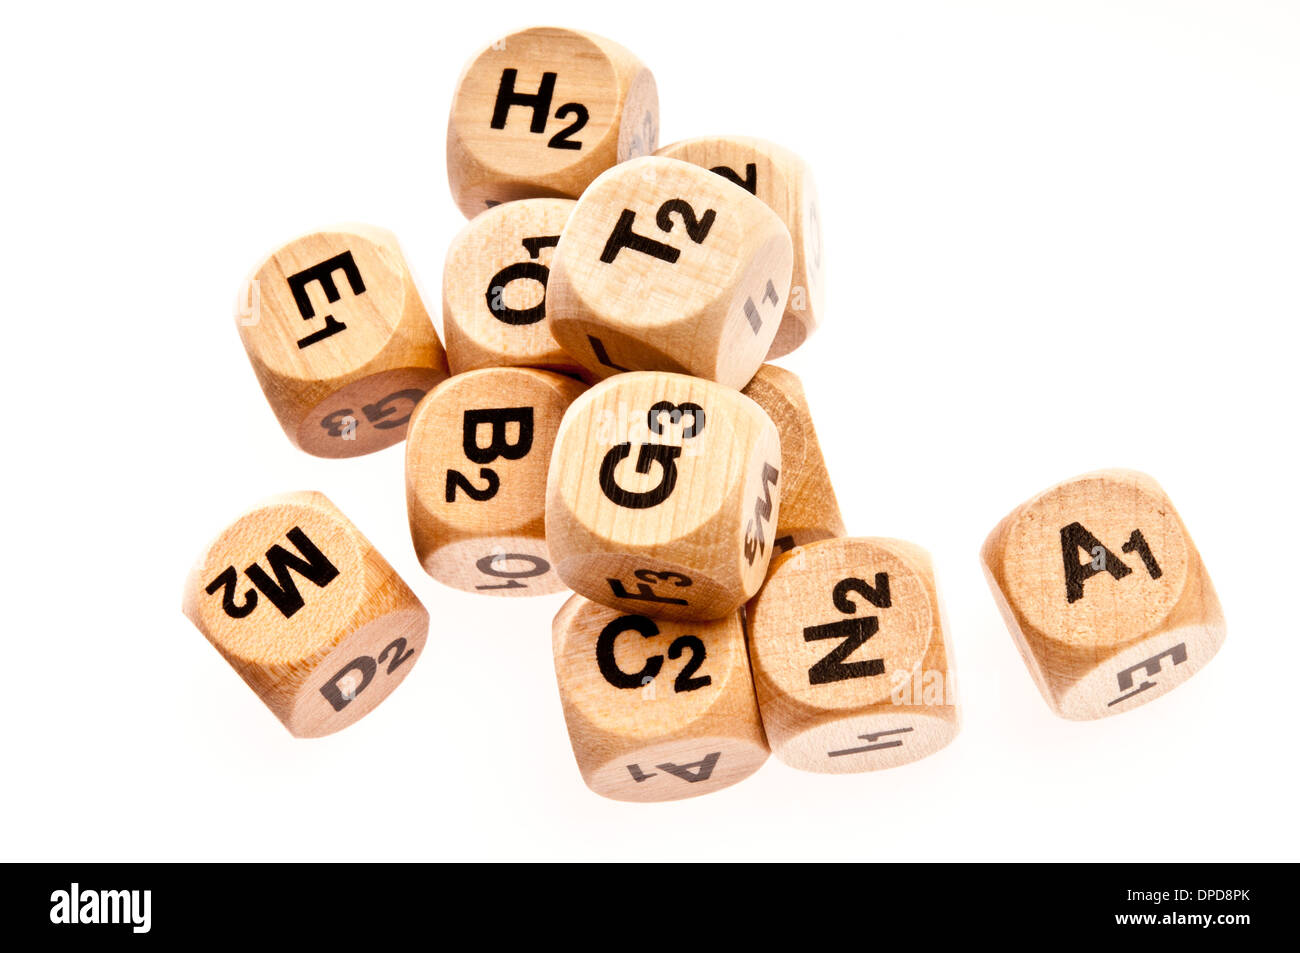 wooden dice with letters Stock Photo